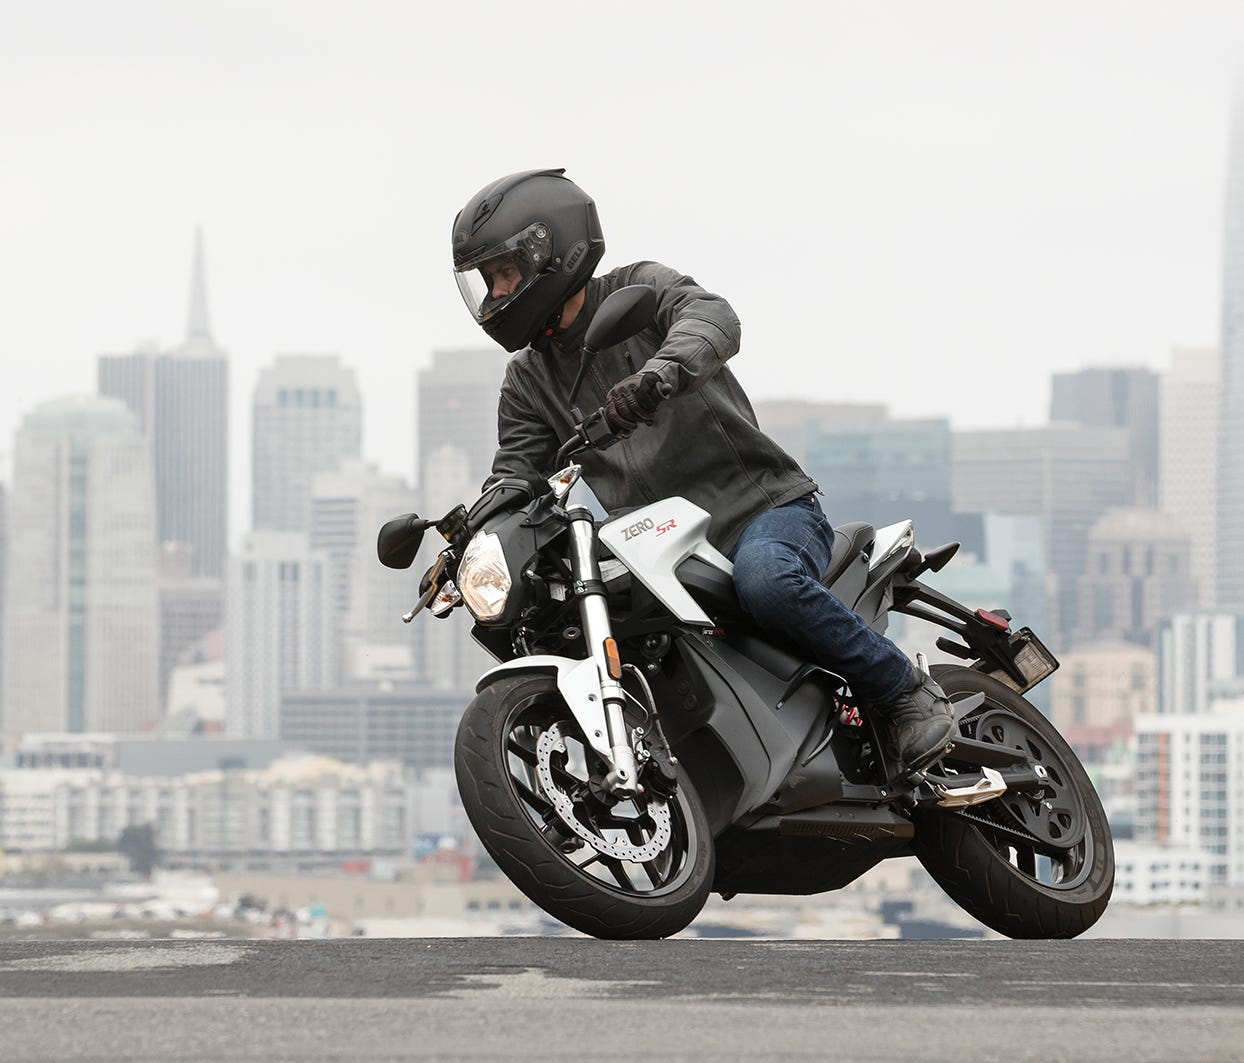 Looking into buying an electric motorcycle? We tested the Zero SR and here is what you need to know about it.